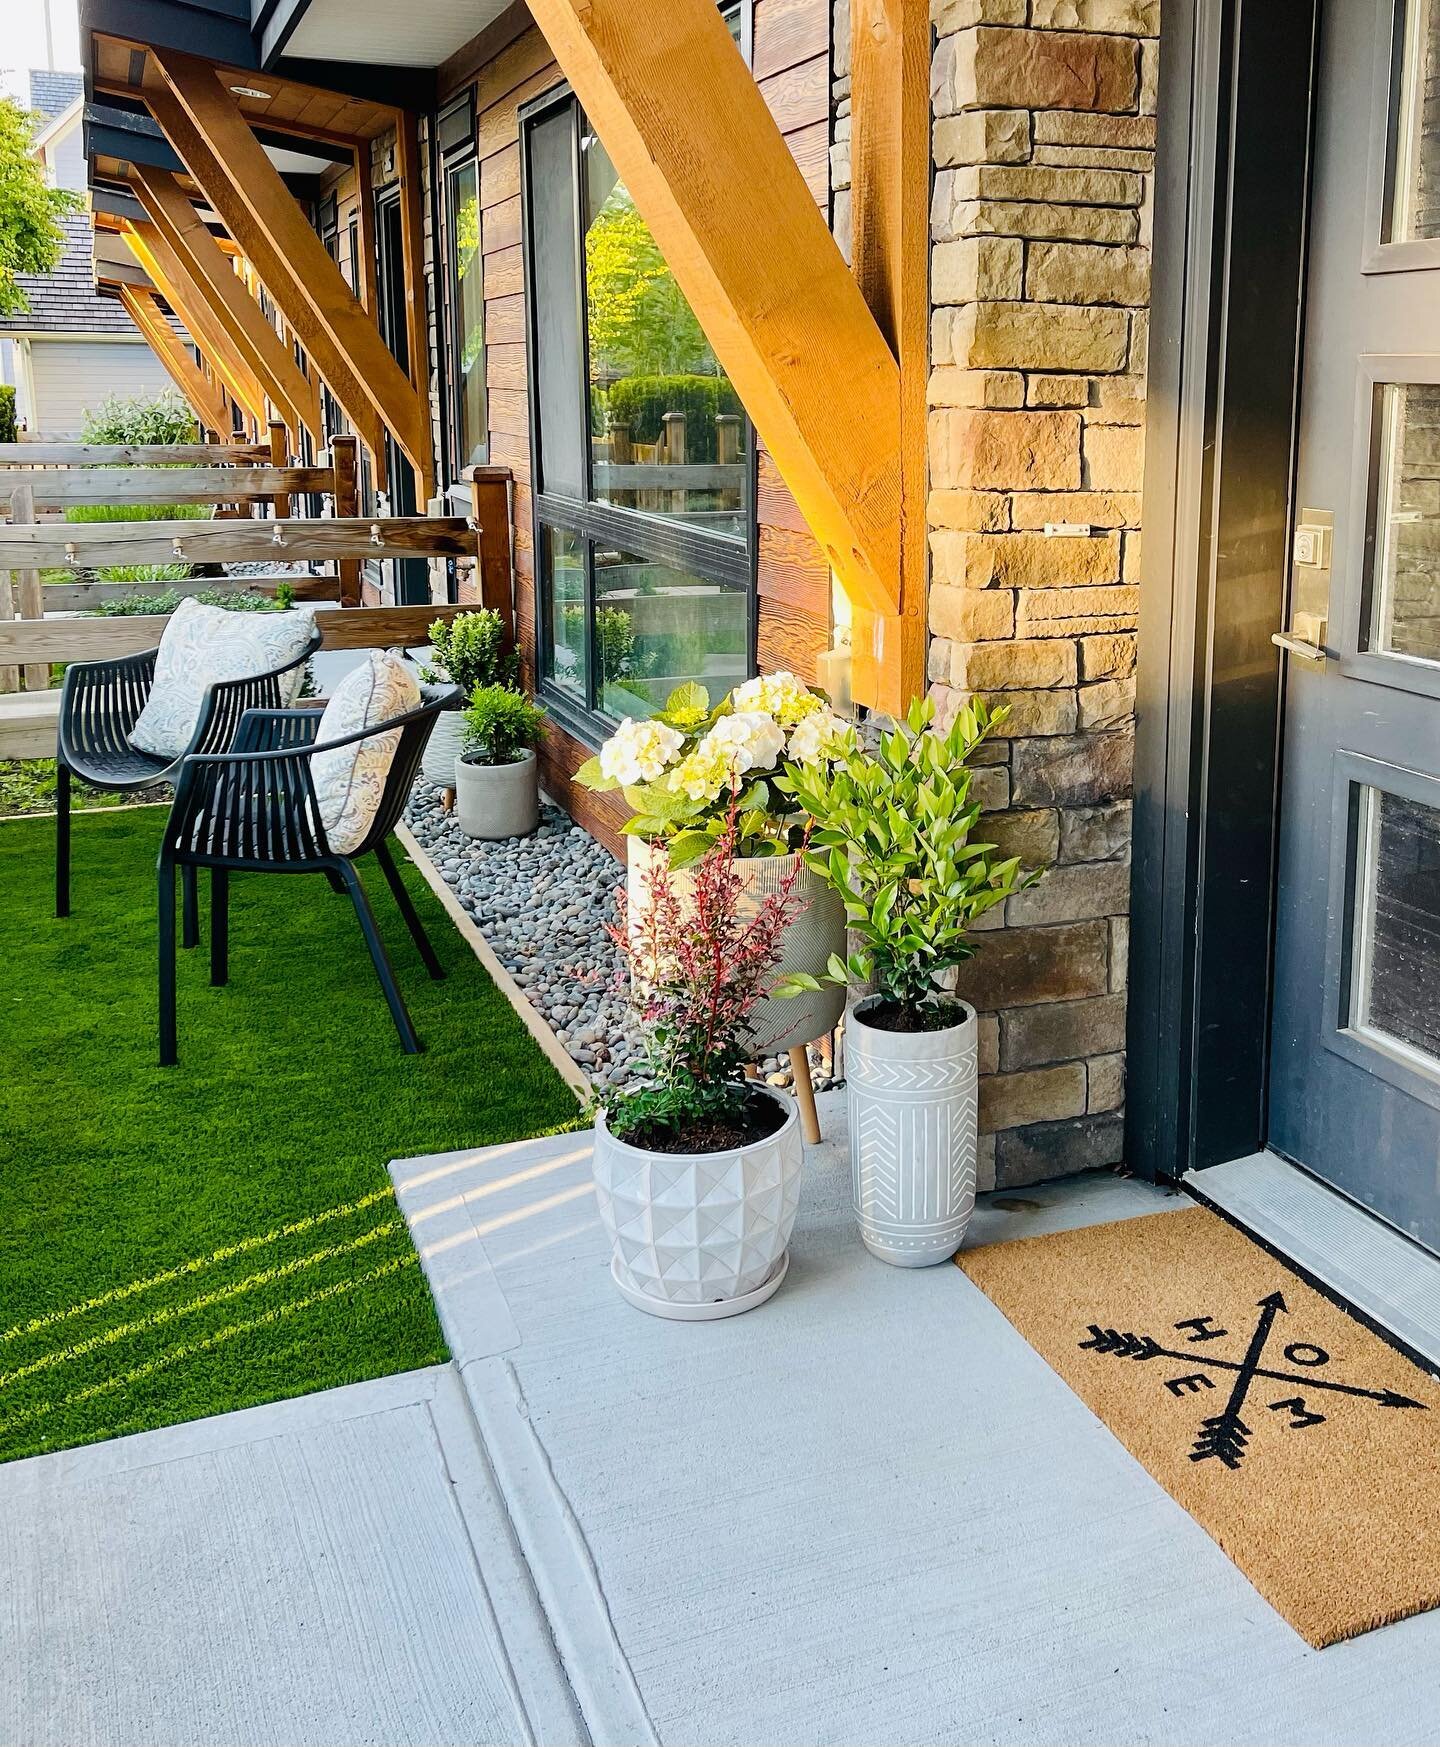 Happiness blooms in this newly refreshed front yard. Whether you have a massive area or something small, creating a space that fits within your vision and budget is very important. This smaller yard was transformed into a cozy oasis within a week. 
R